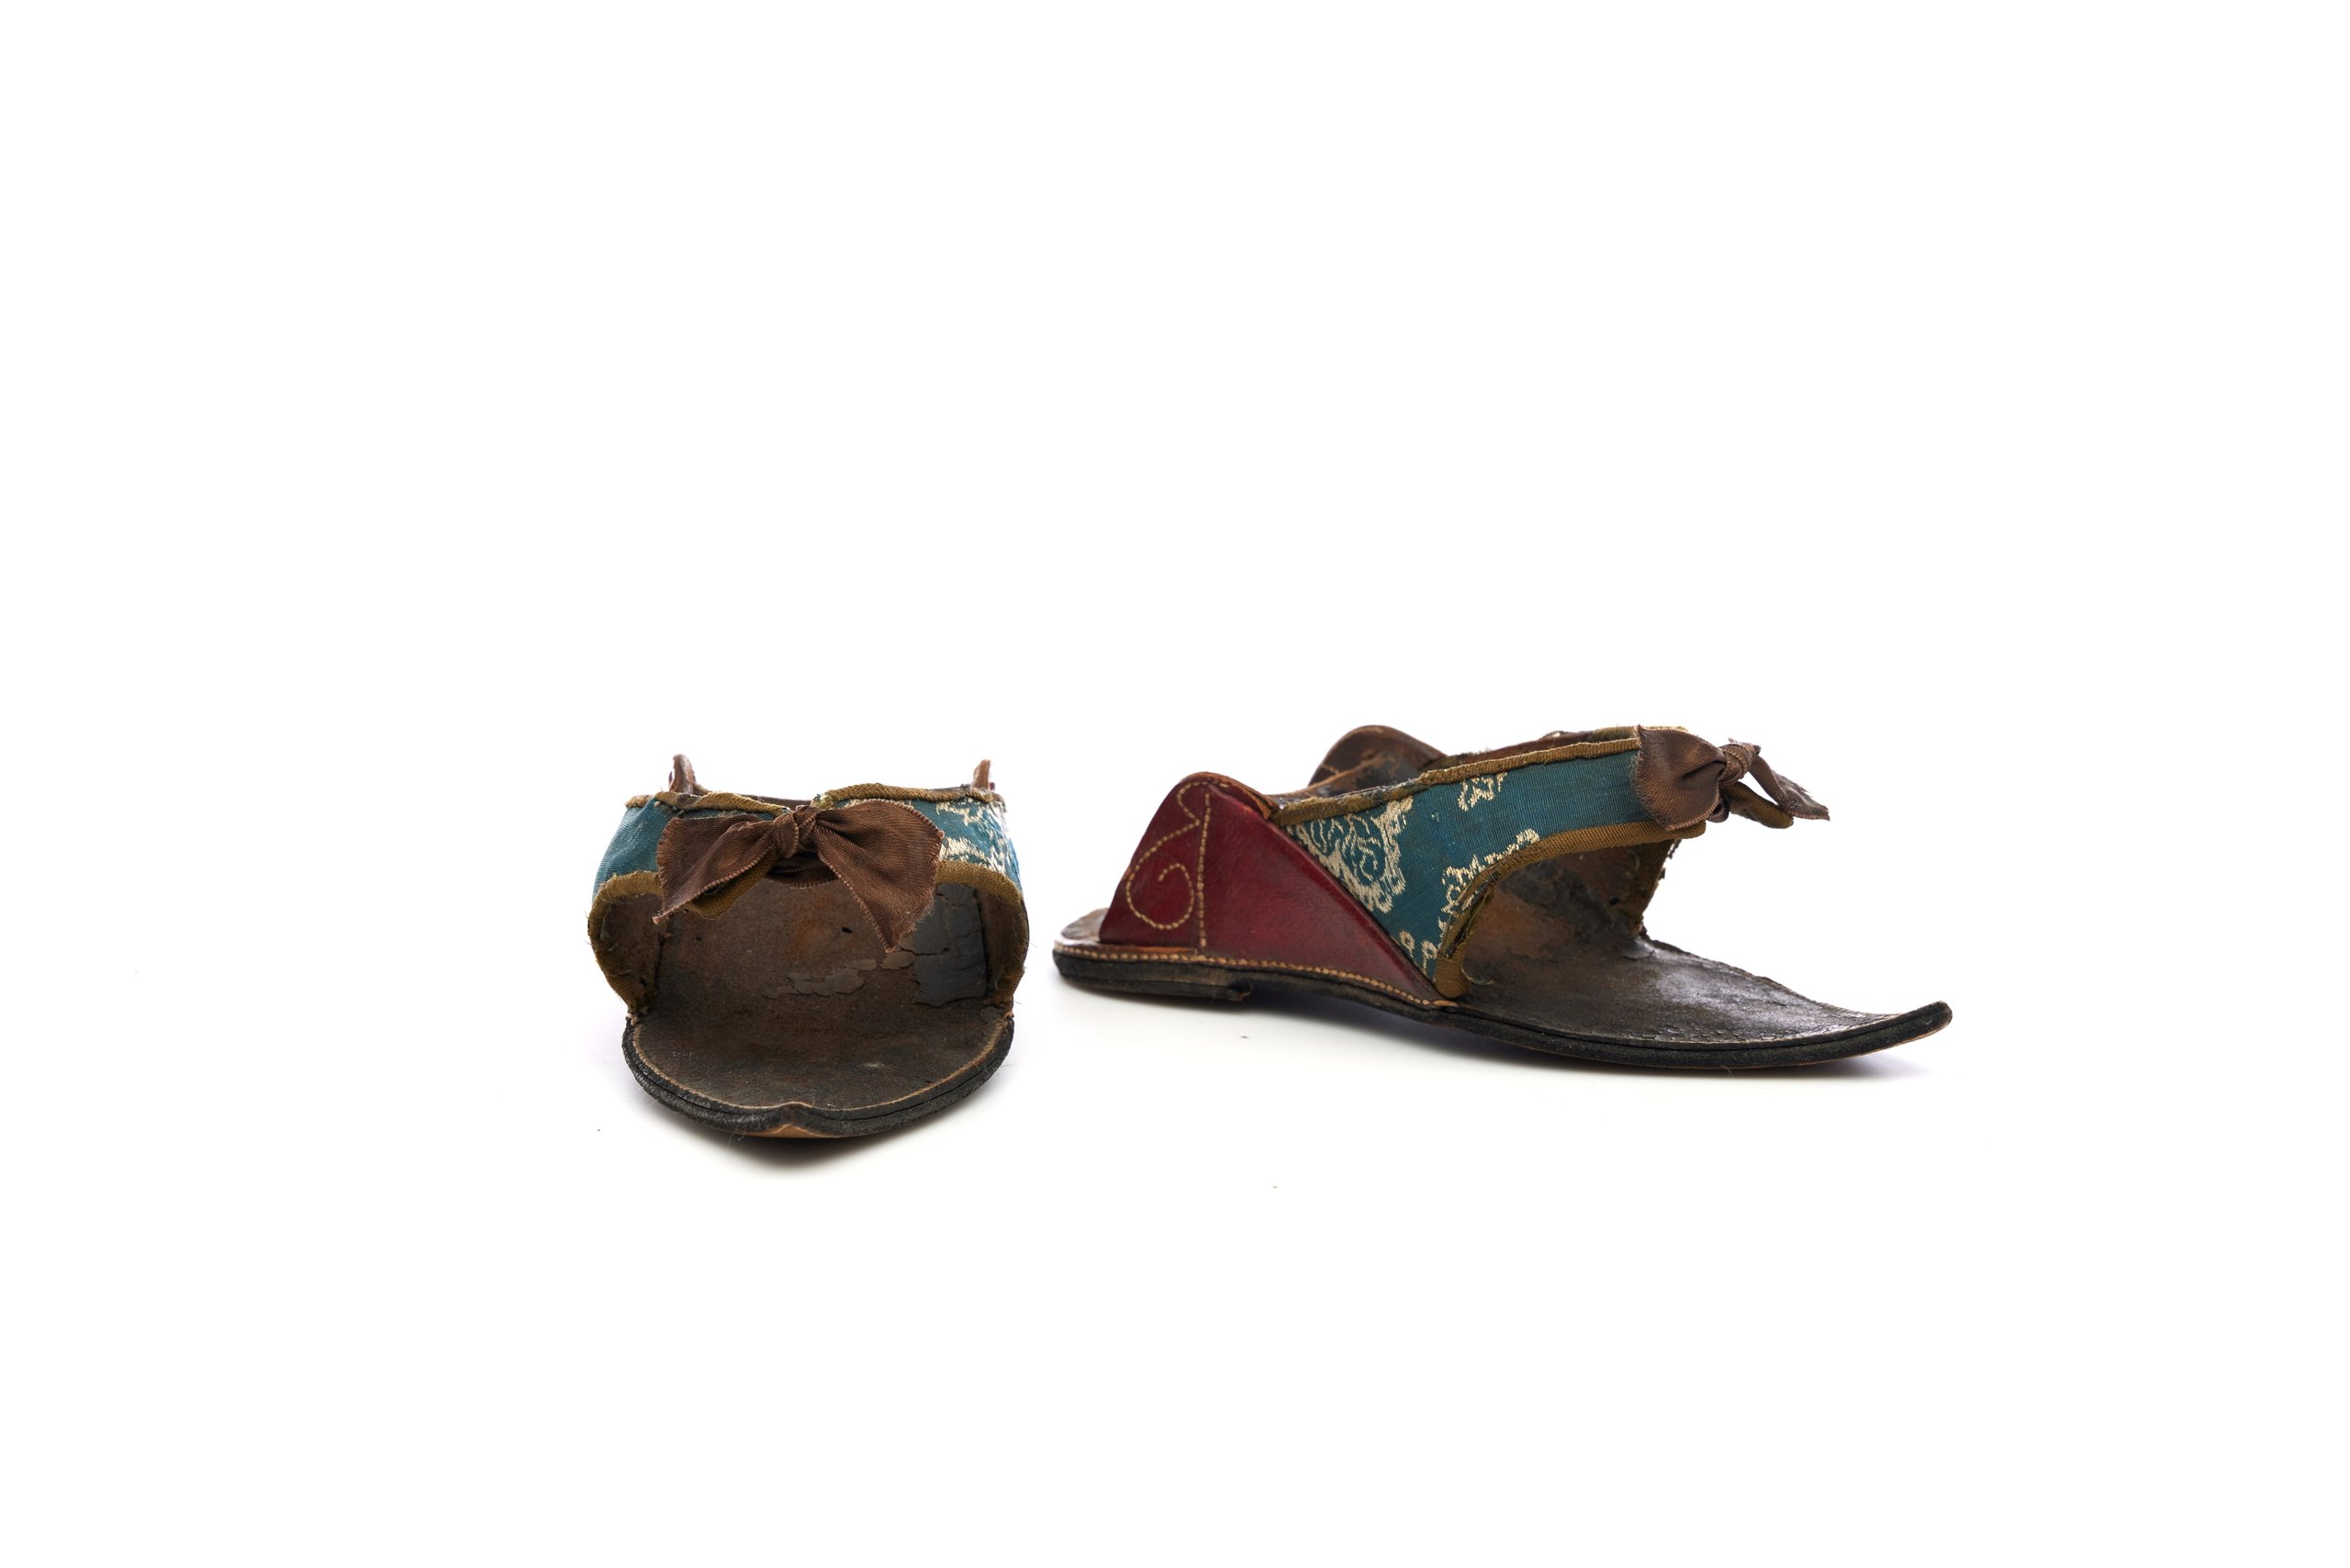 Pair of clog tie overshoes from the Joseph Box collection